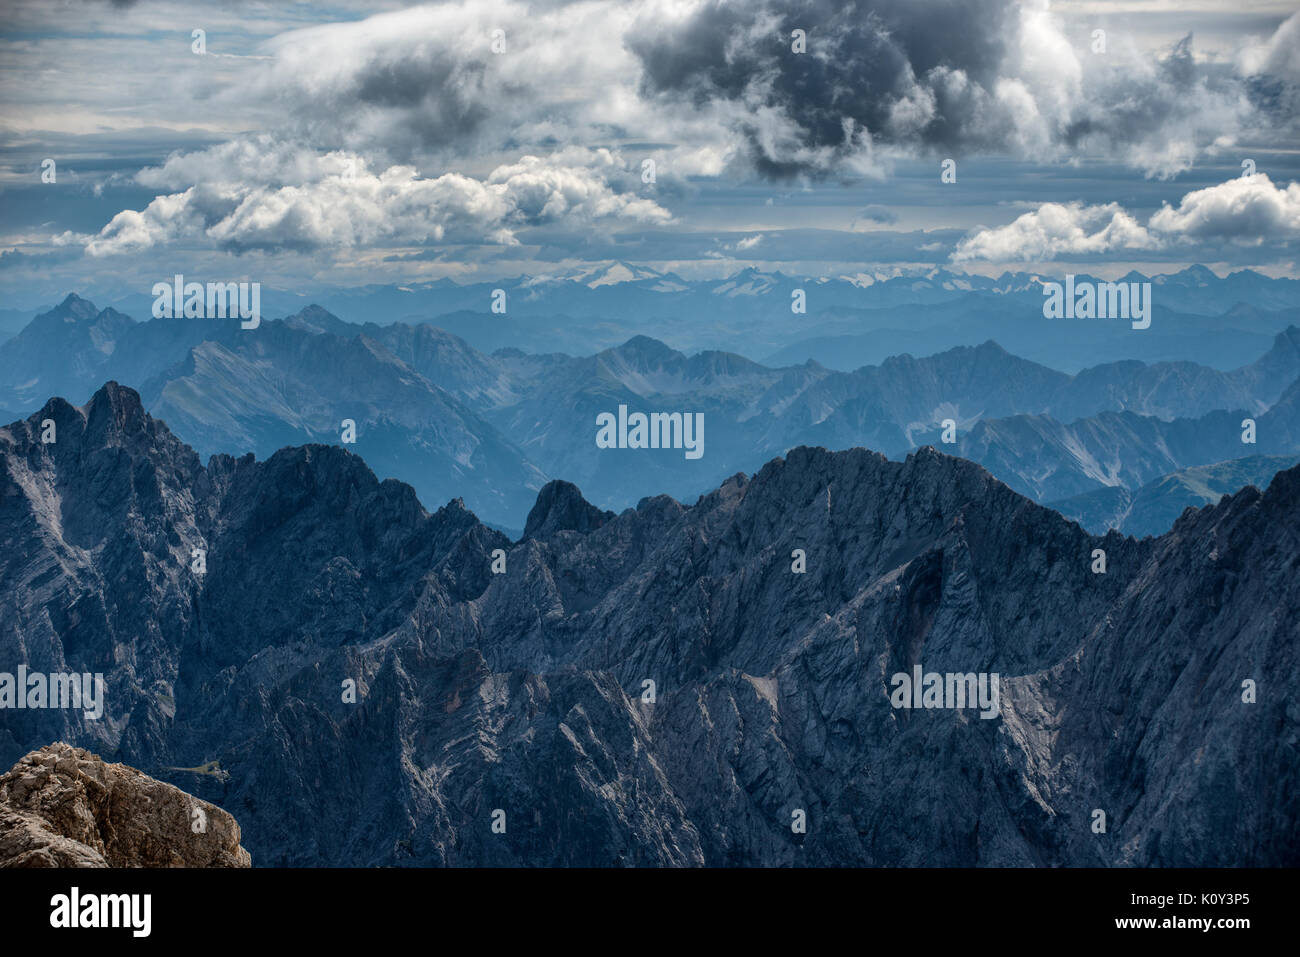 The view from the top of the Zugspitze mountain on the Austria Germany border. Stock Photo